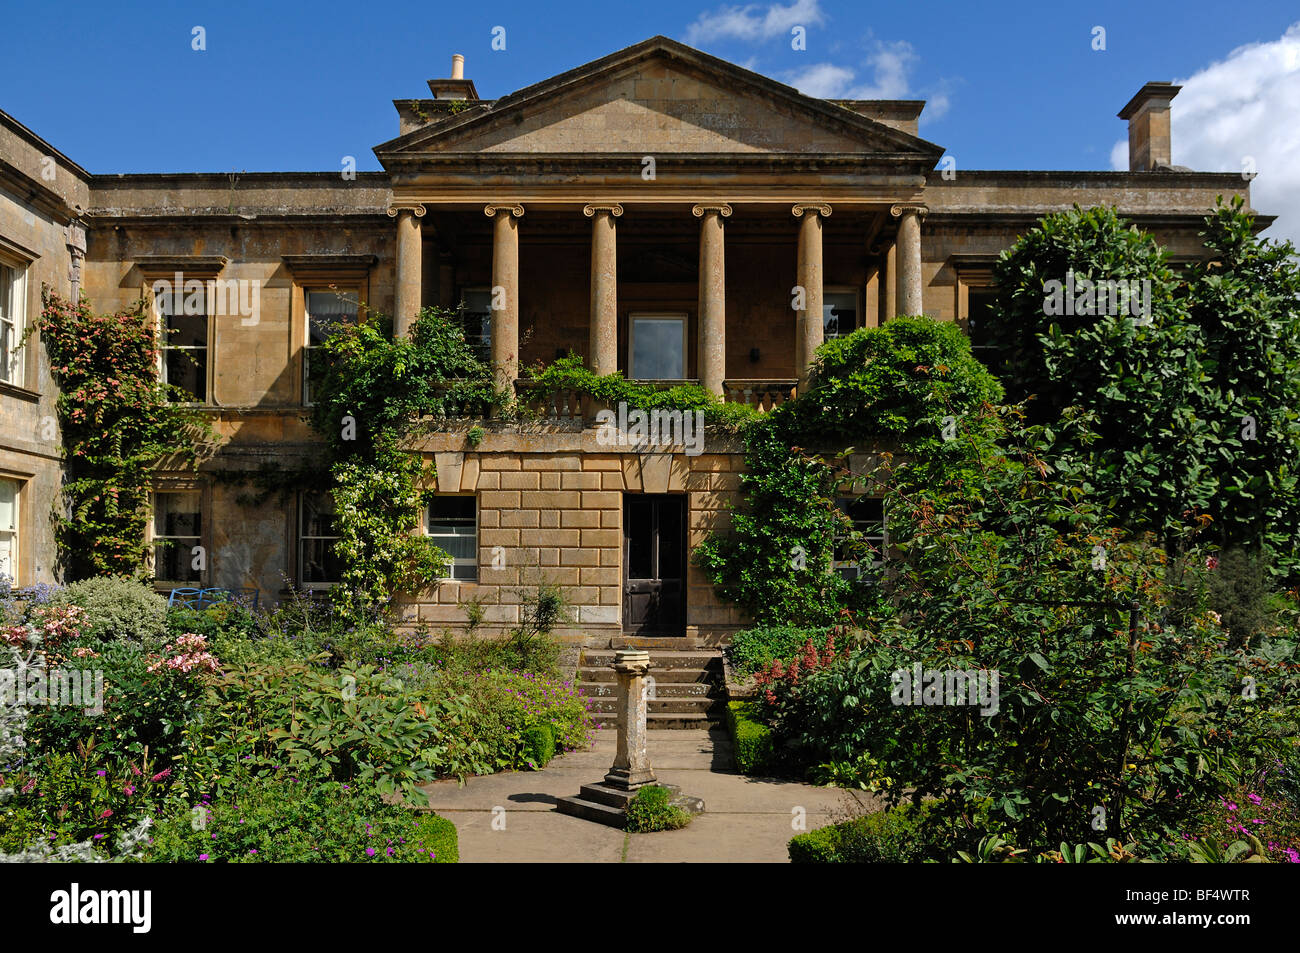 Garden and building with columns at Kiftsgate Court Gardens, late 19th Century, Mickleton, Chipping Campden, Gloucestershire, E Stock Photo